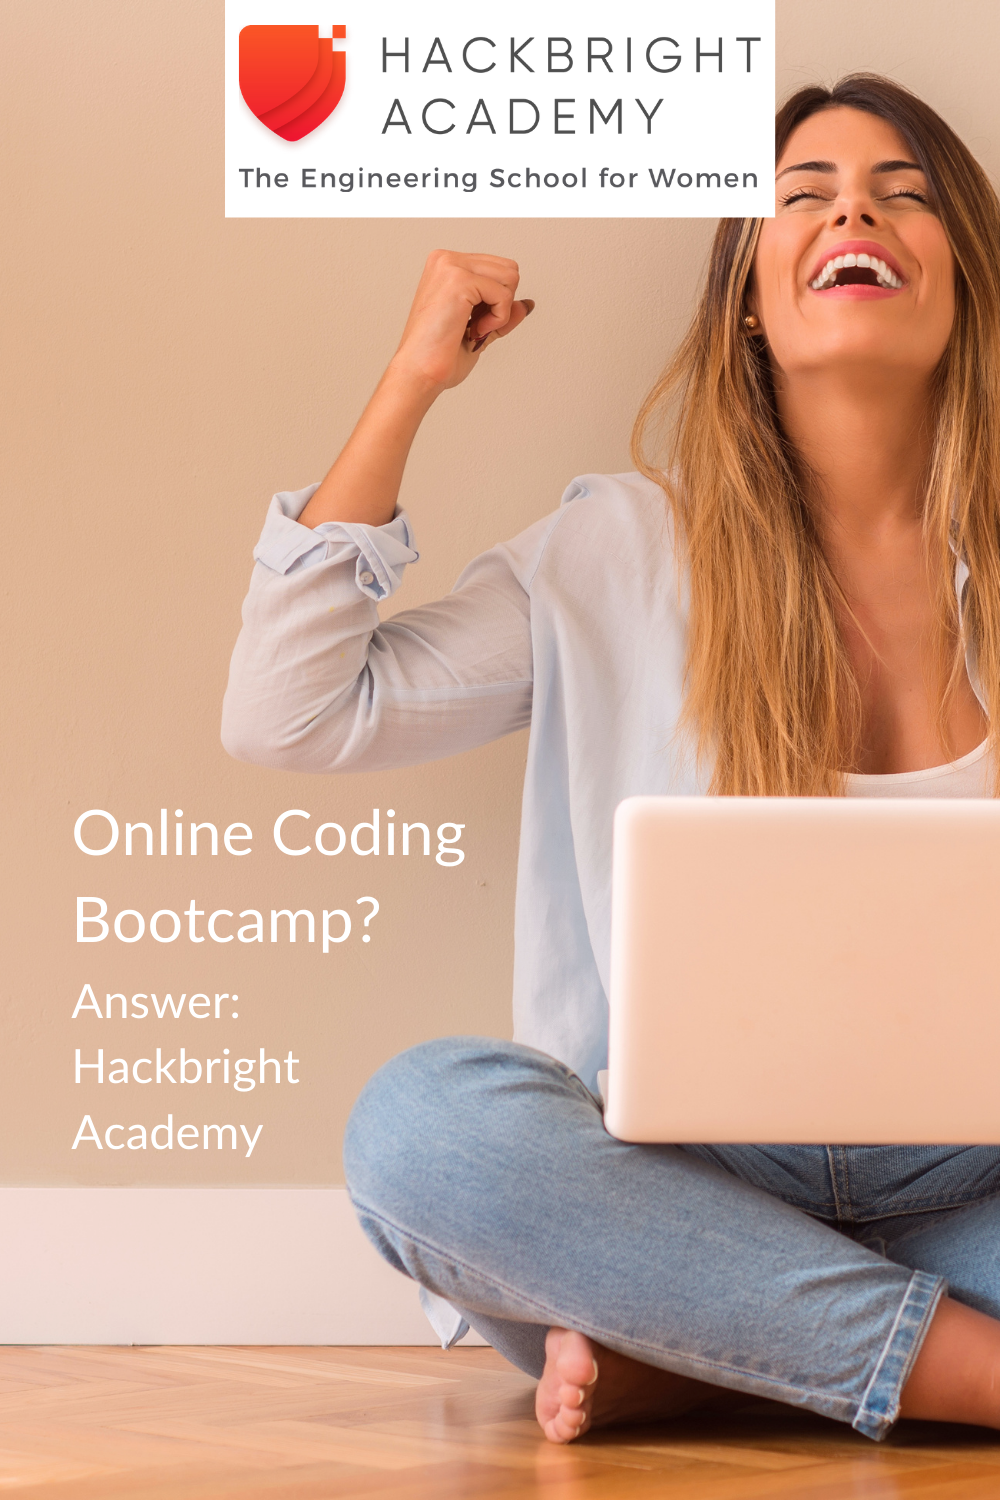 Online Coding Bootcamp? Answer: Hackbright Academy